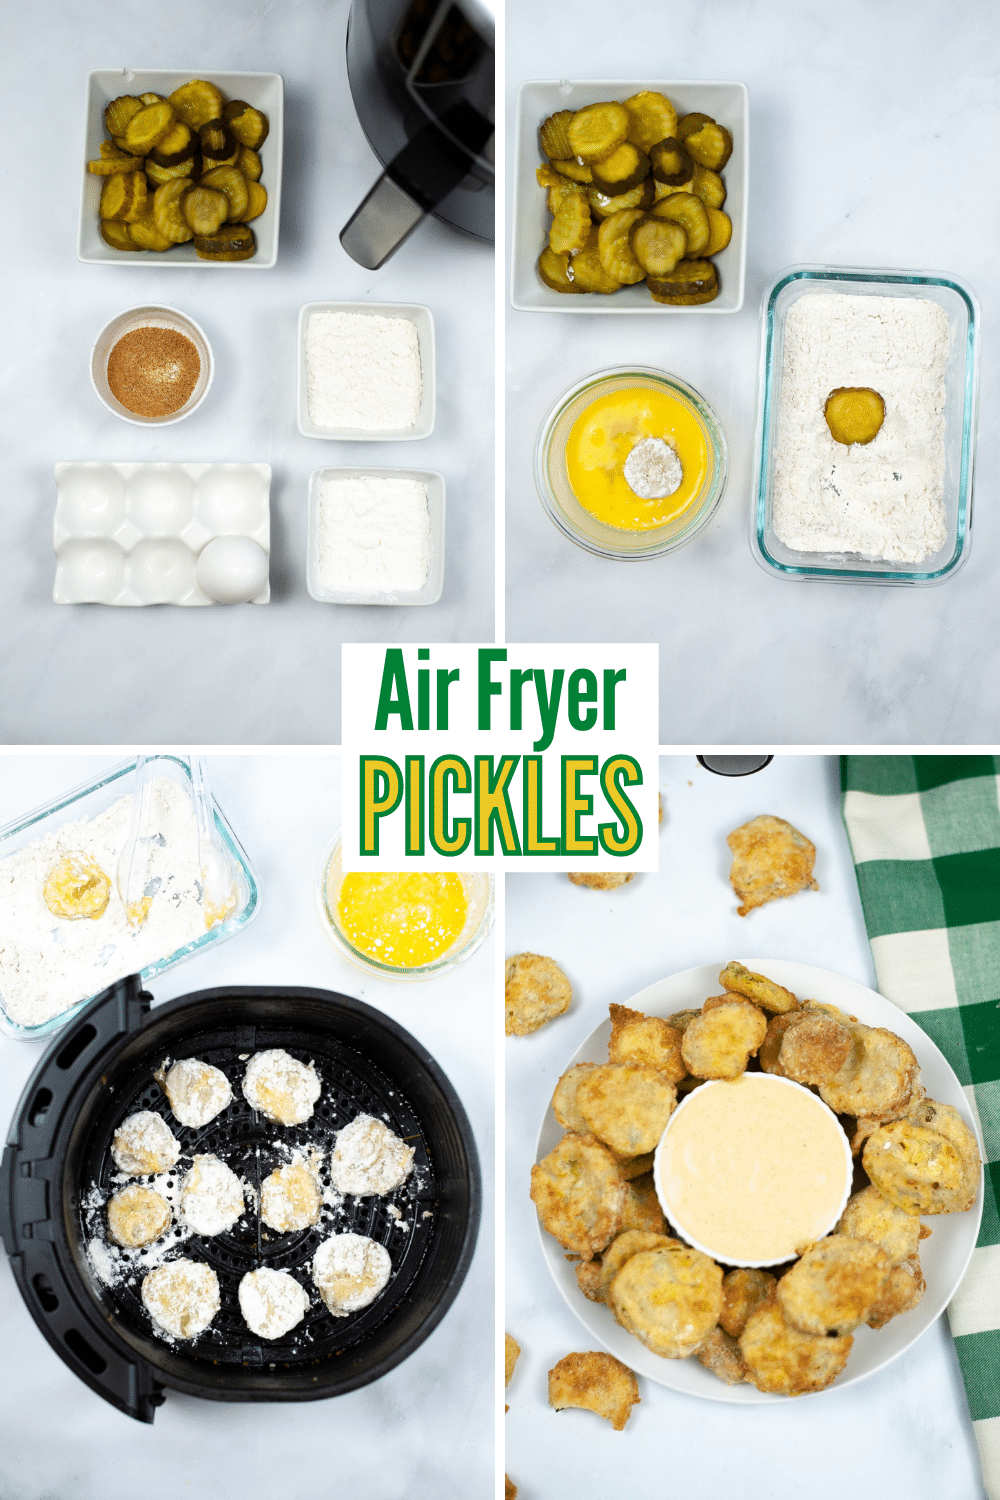 These air fryer pickles are such an irresistible appetizer or snack! You can eat this with no regrets since this is a healthier version. #airfryer #airfryerpickles #pickles #picklechips via @wondermomwannab